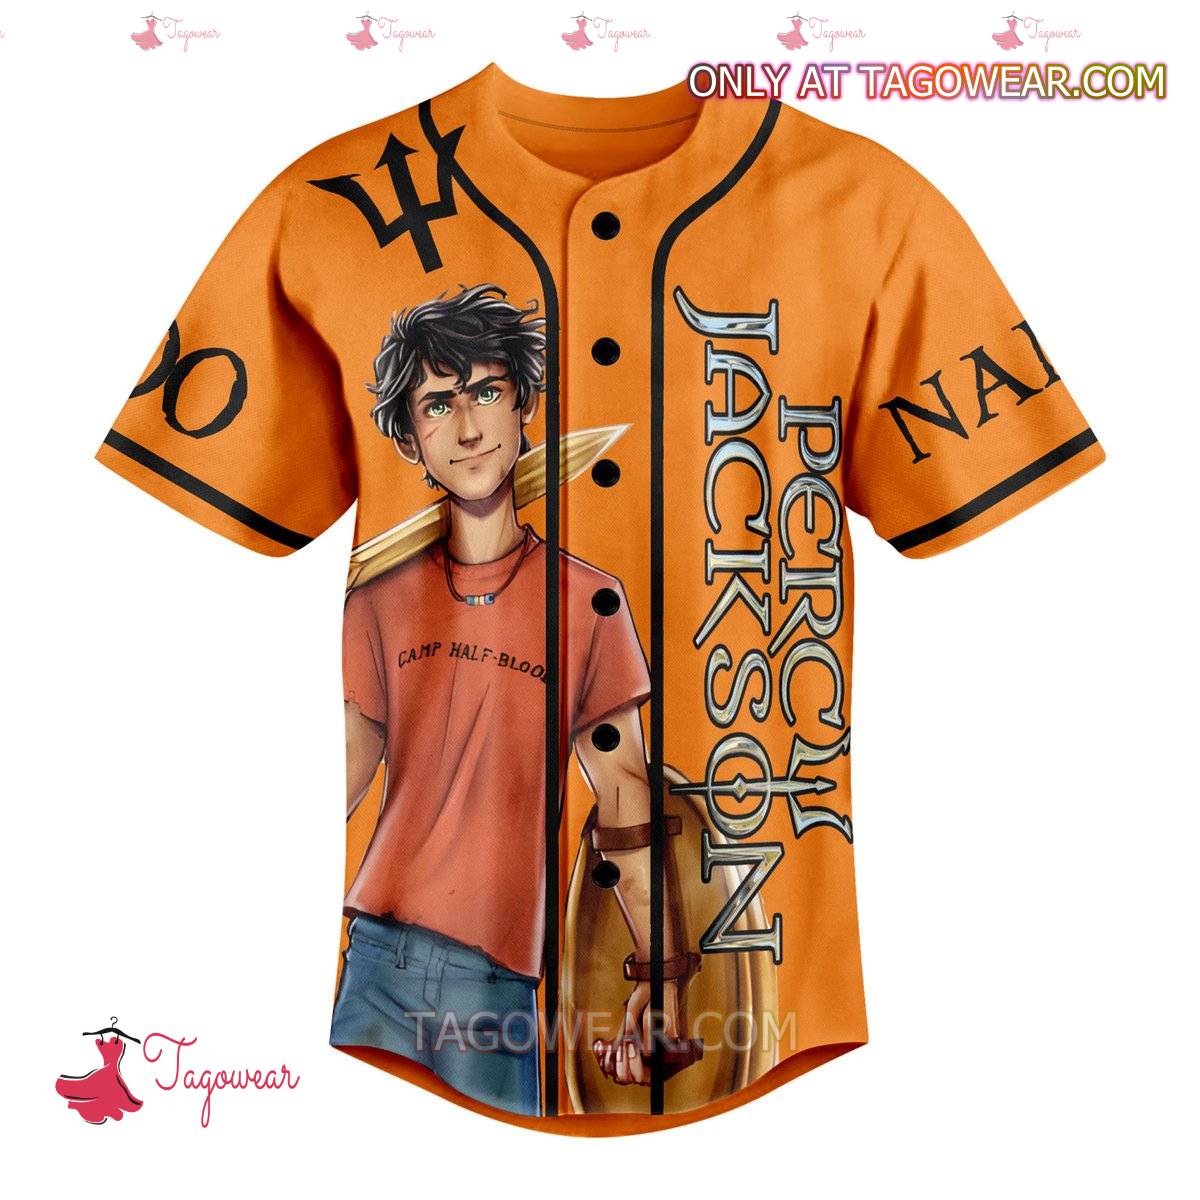 Percy Jackson Look I Didn't Want To Be A Half-blood Personalized Baseball Jersey a